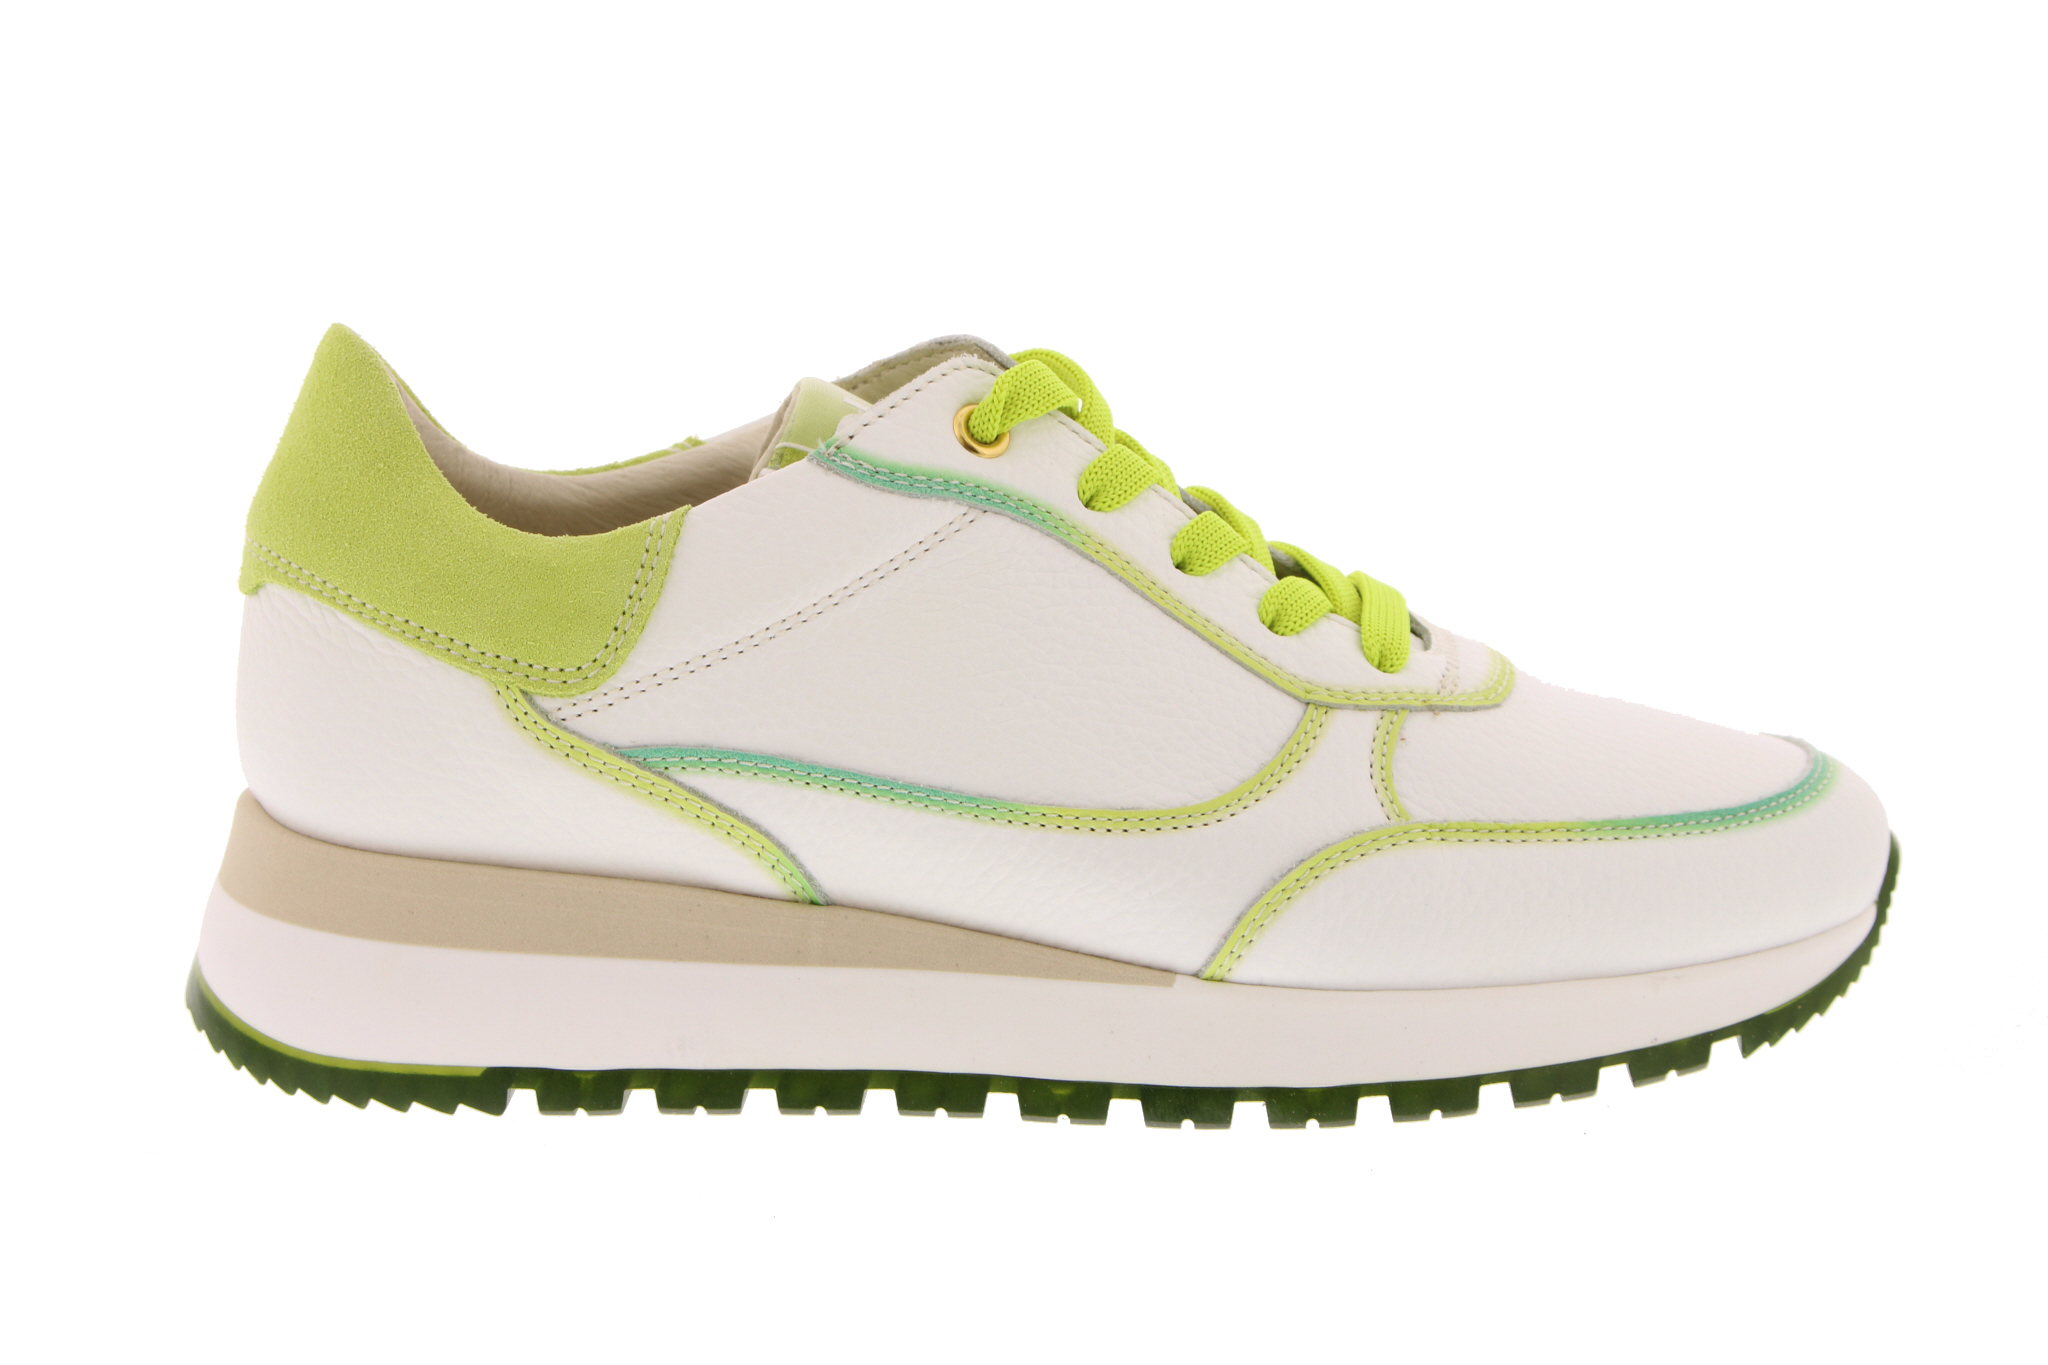 Sneakers | Sport | Green 5645 | Free delivery | shoes and fashion